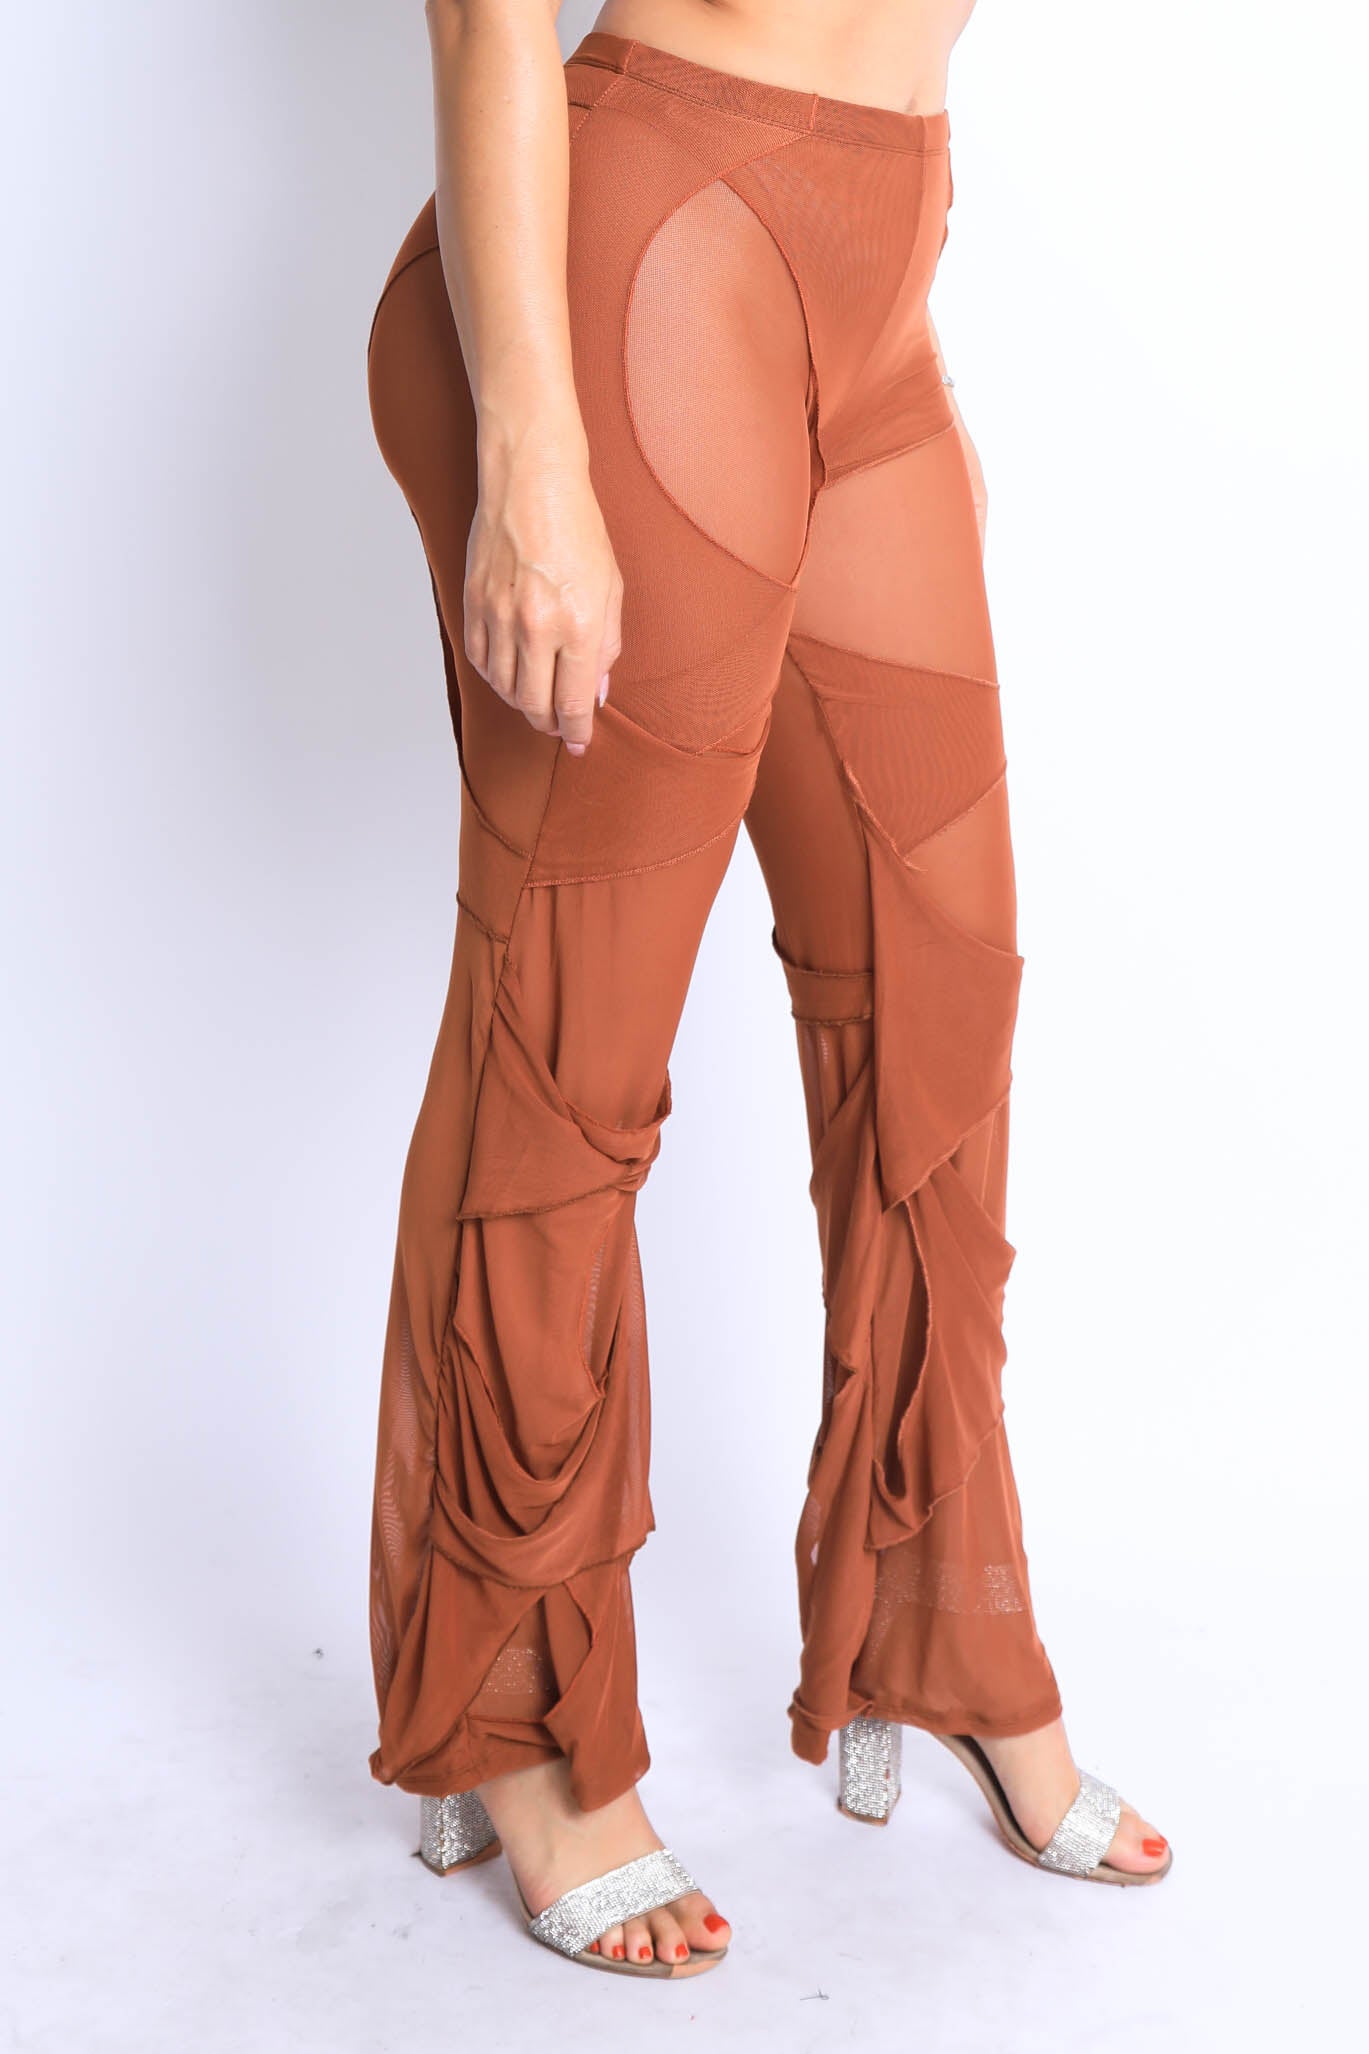 See Through Hollow Out Mesh Beach Cover Up Pants  Ishka